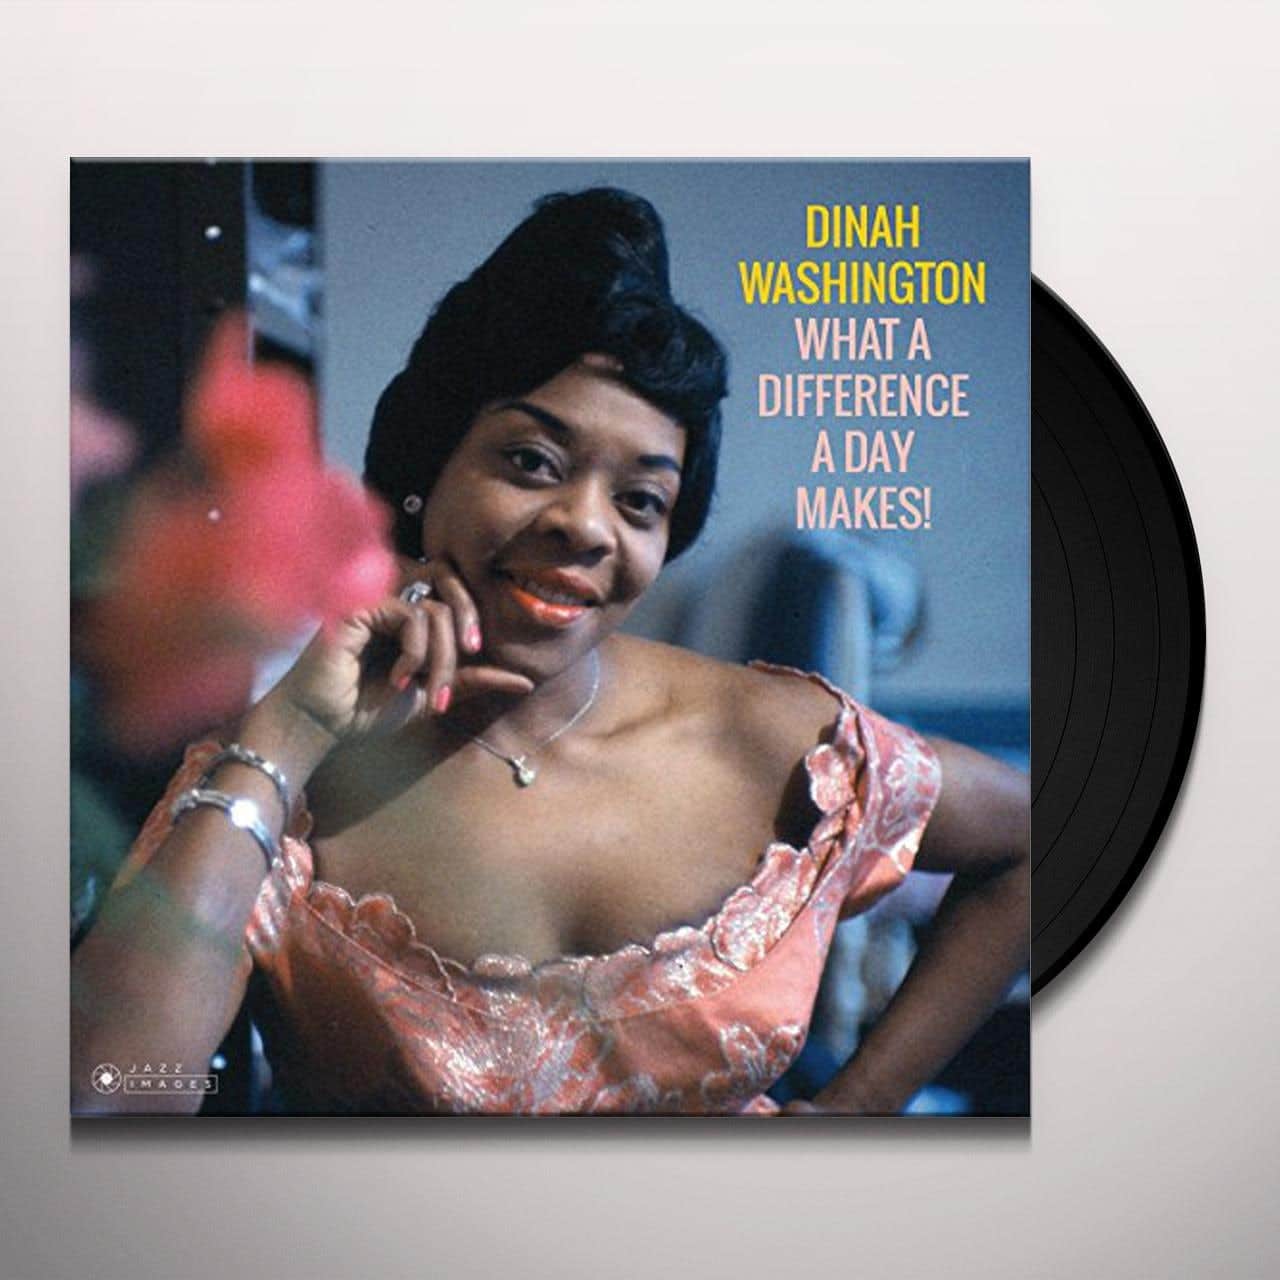 DINAH WASHINGTON - WHAT A DIFFERENCE A DAY MAKES (LTD EDITION